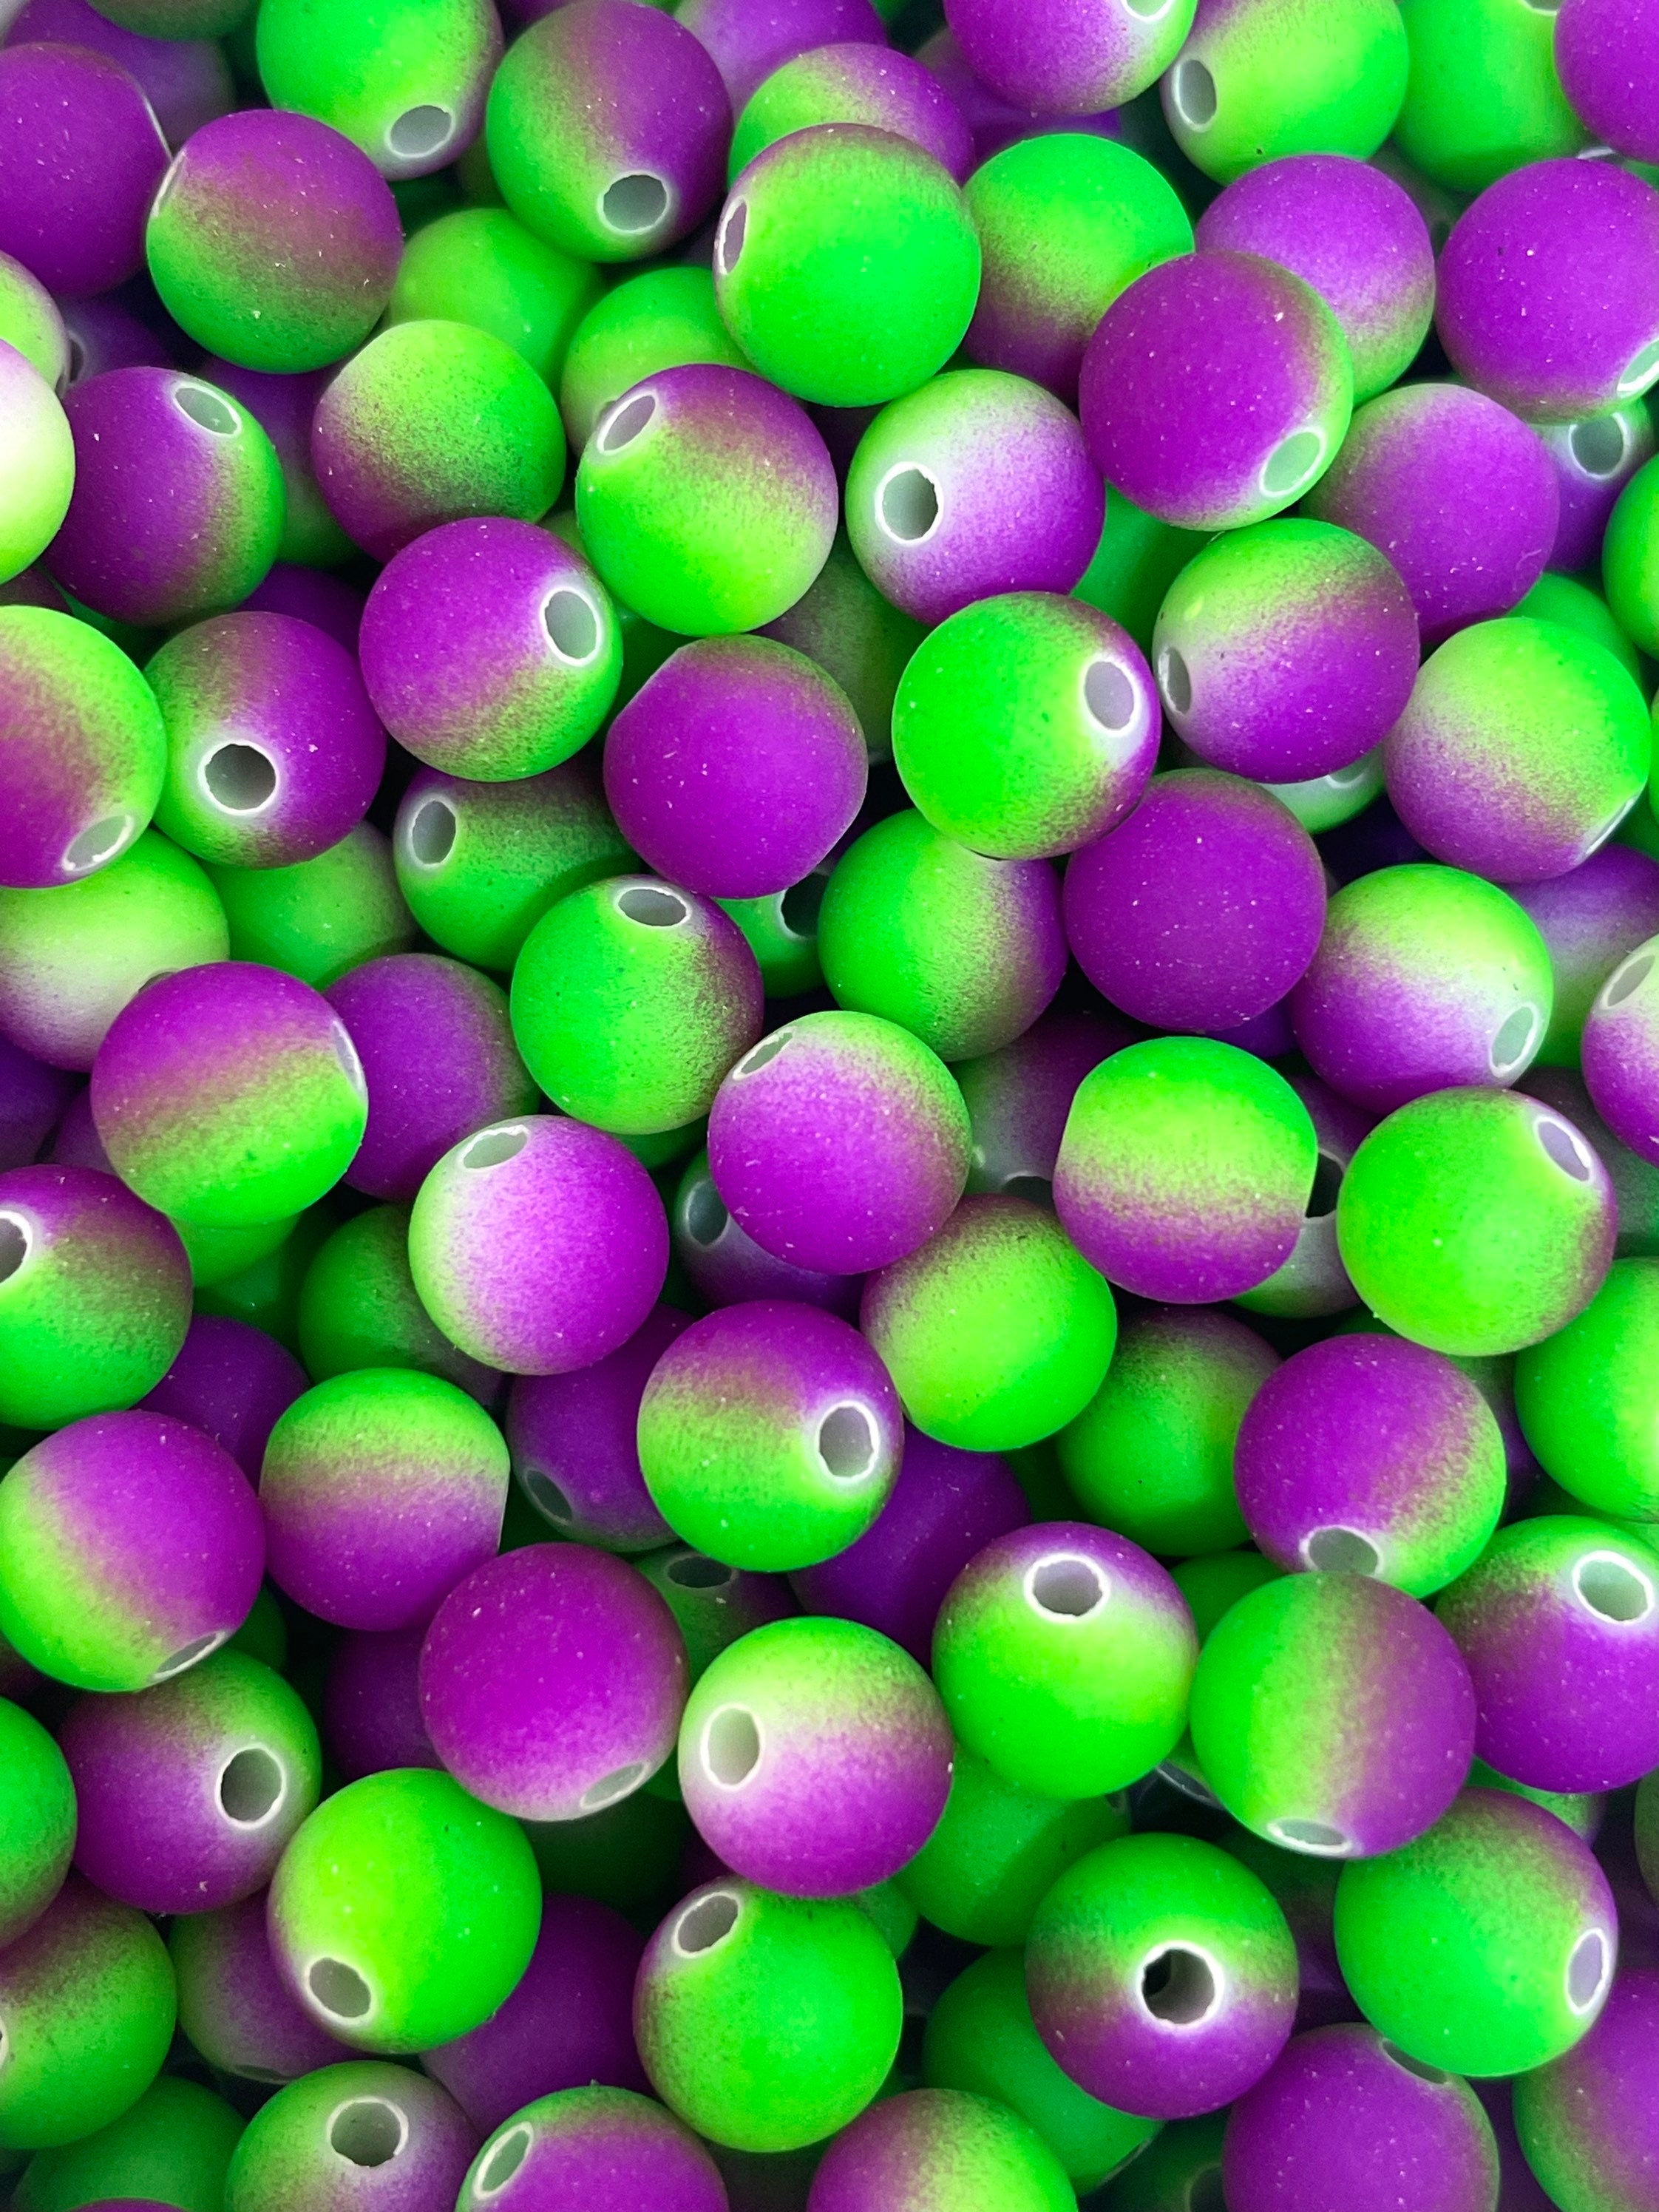 Bright Neon Green and Purple Round Beads, Rubberized Beads, Rave Beads, EDM Jewelry, Festival Beads